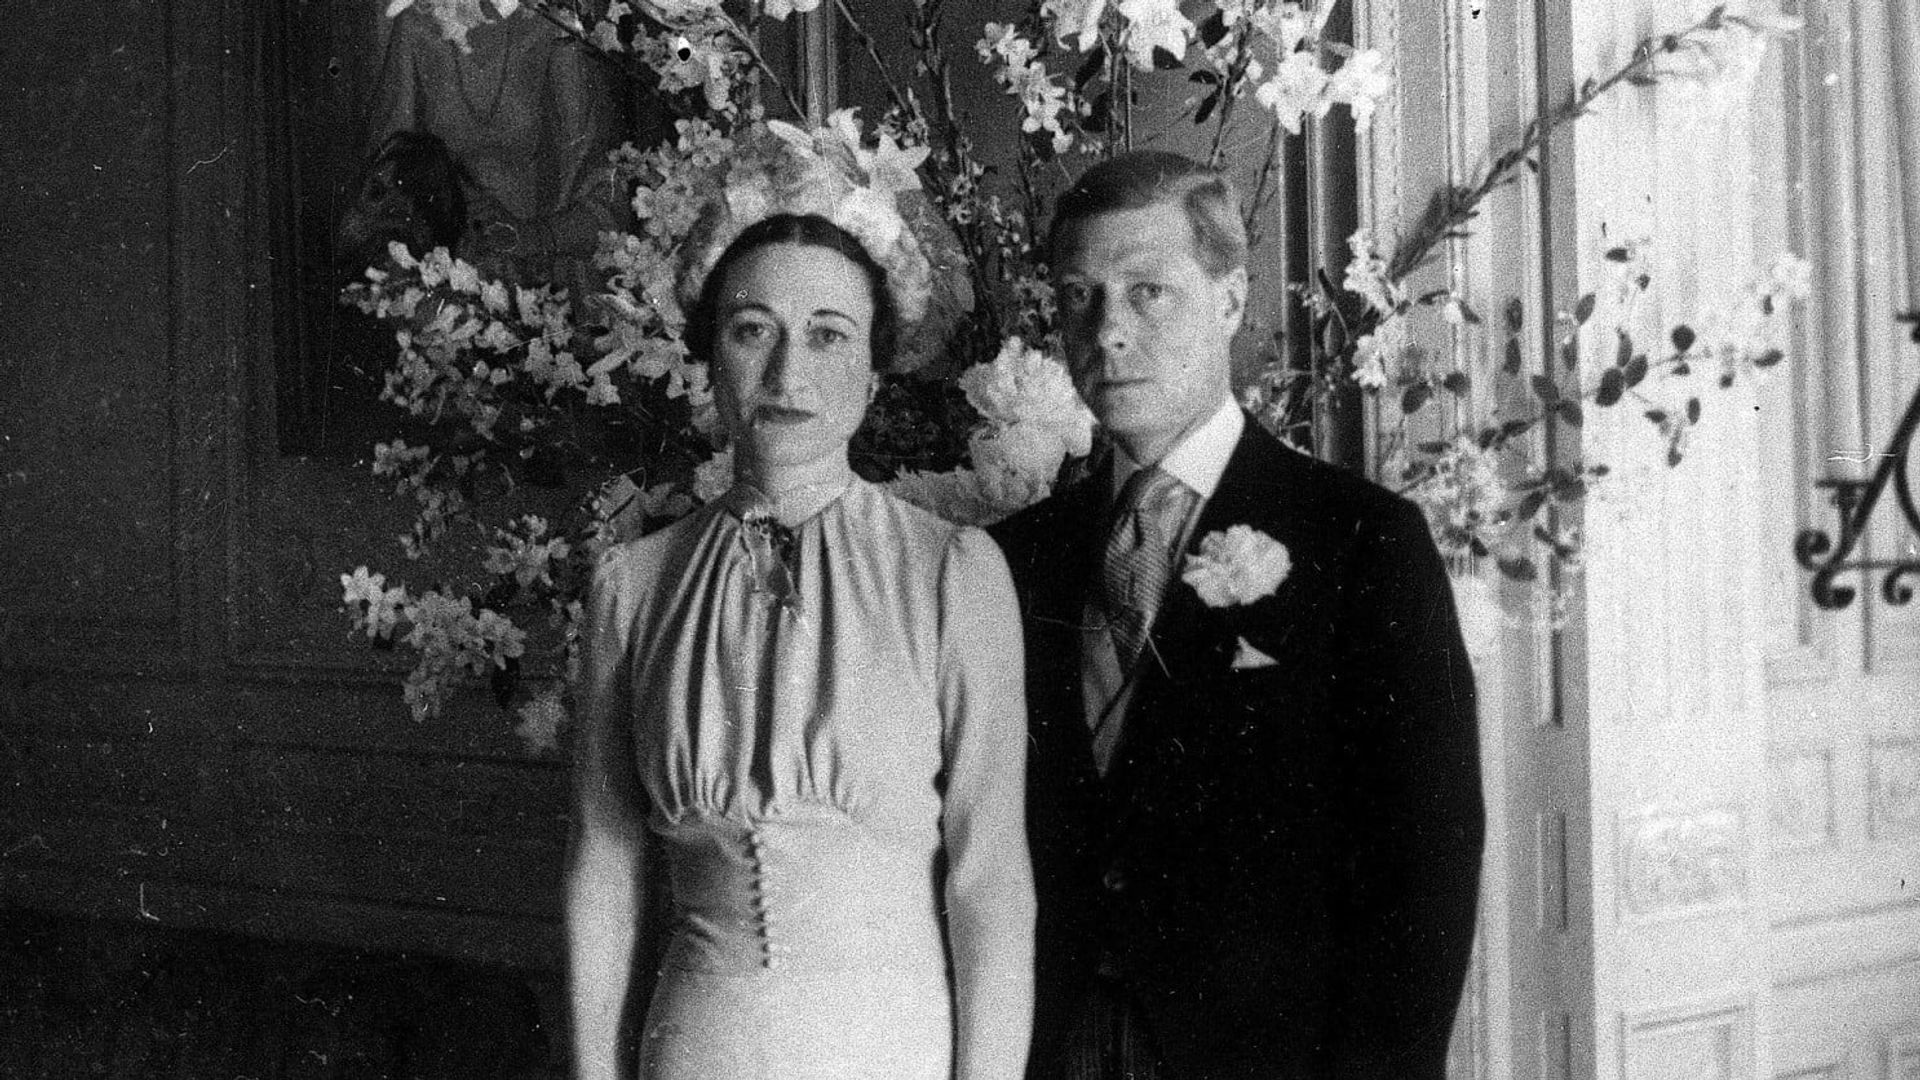 The Windsors: A Royal Dynasty background